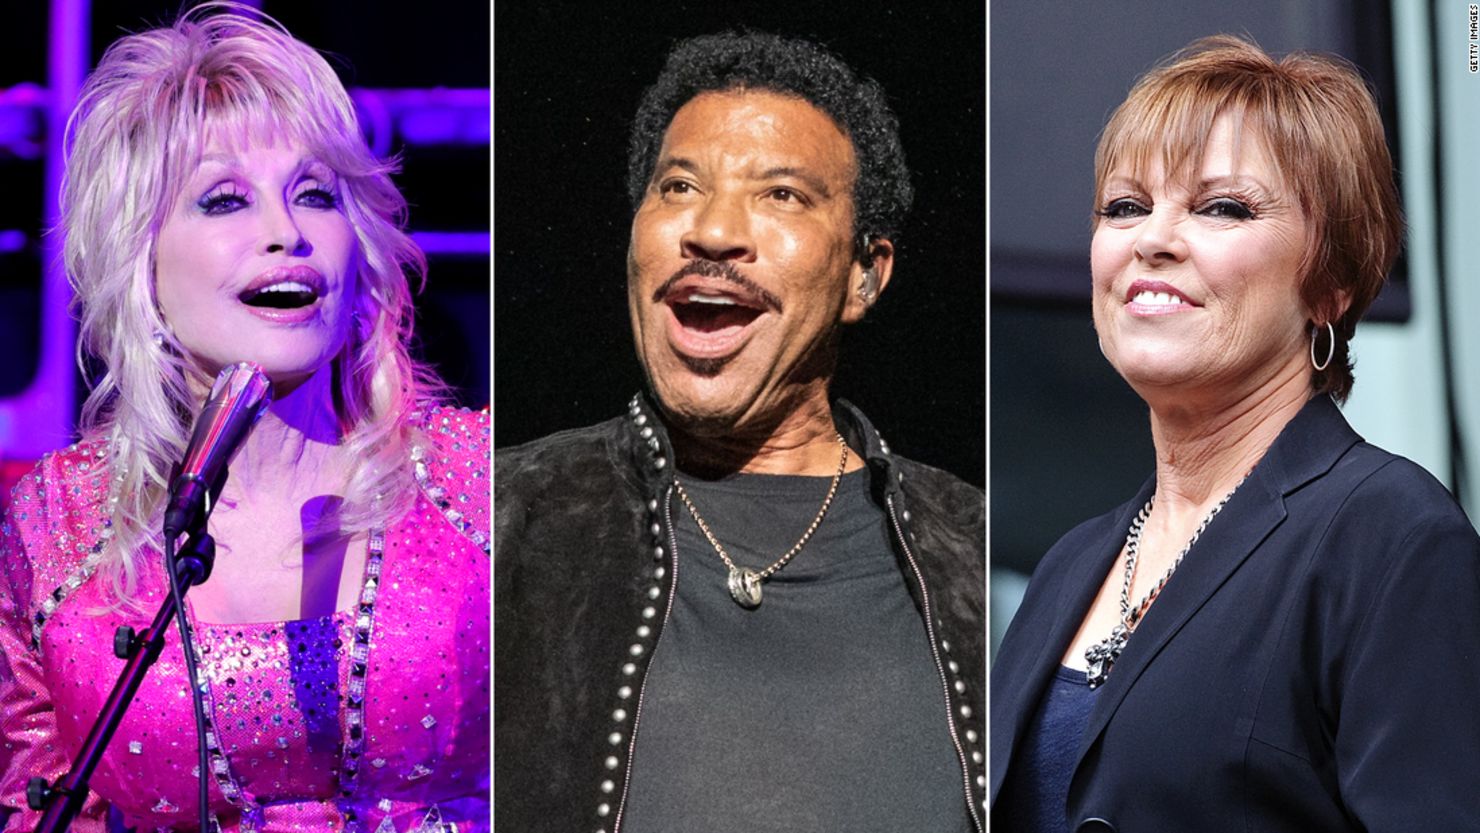 Dolly Parton, Lionel Richie and Pat Benatar are among this year's Rock & Roll Hall of Fame inductees.